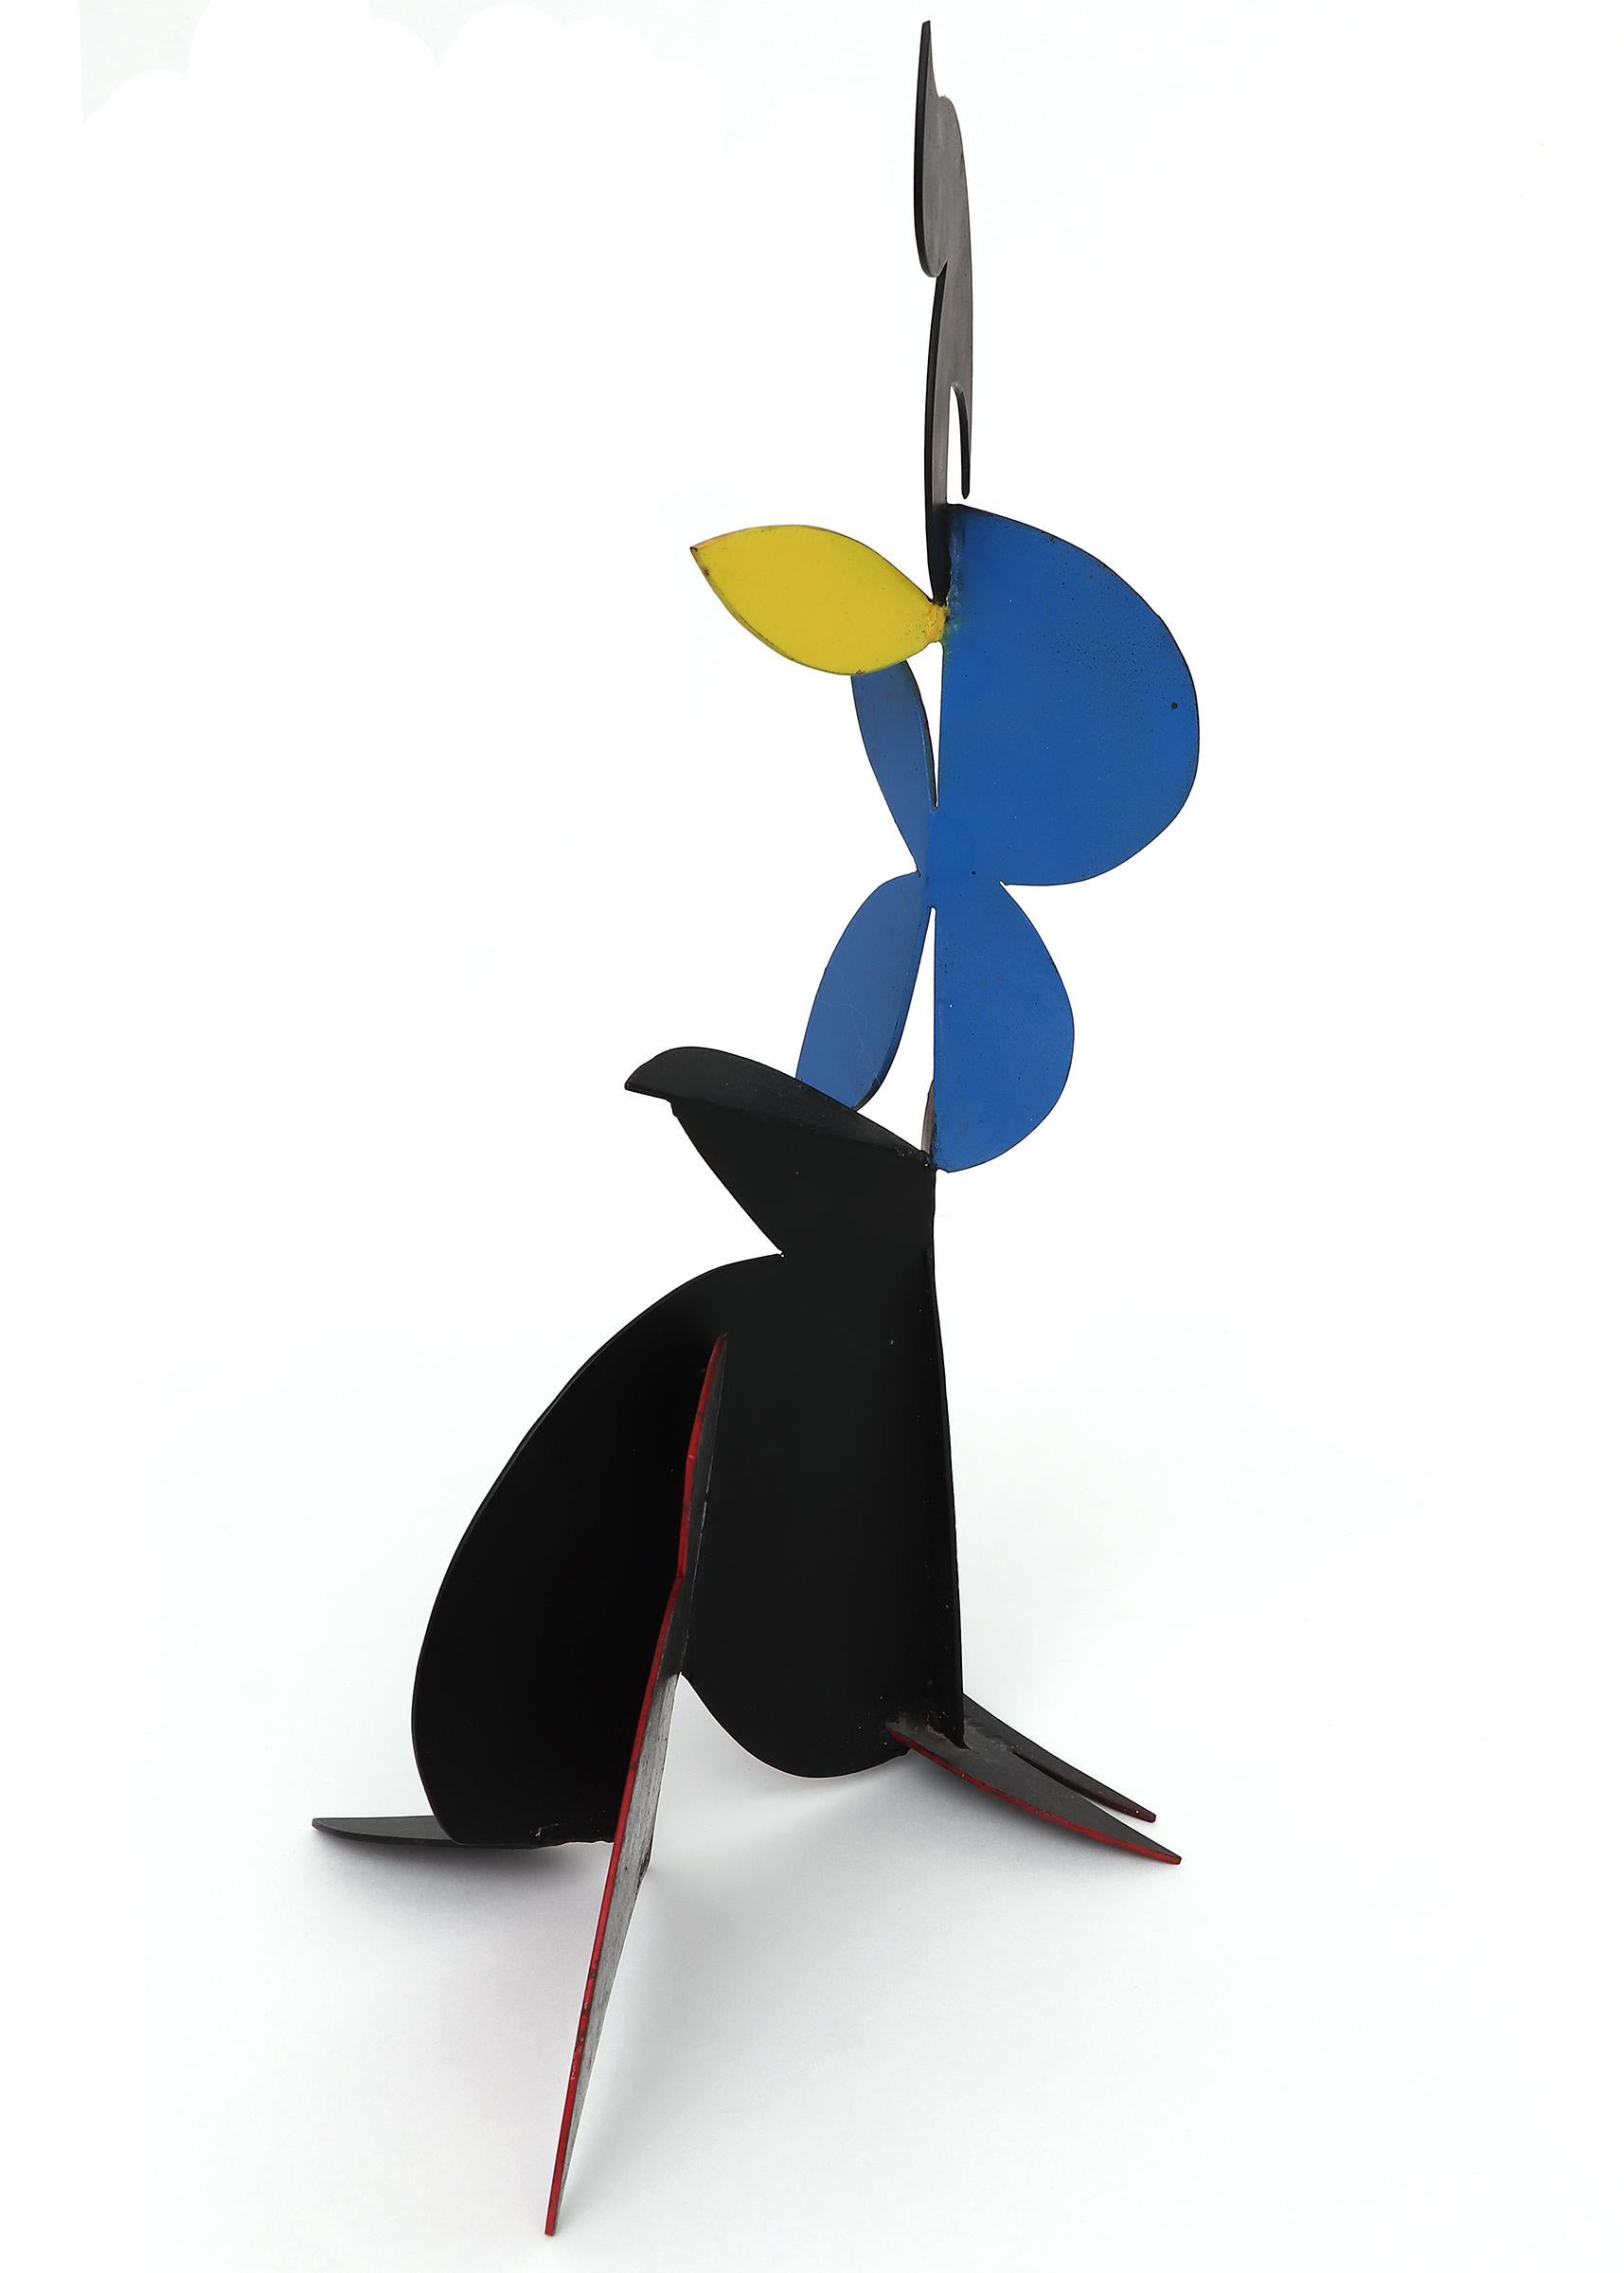 Abstract painted metal sculpture by Edward (Eduardo) Arcenio Chavez (1917-1995). Painted in the three primary colors: red, blue, and yellow. Sculpture measures 16 ½ x 7 x 11 inches. 

About the Artist:

Born 1917
Died 1995

Born in Wagonmound, New